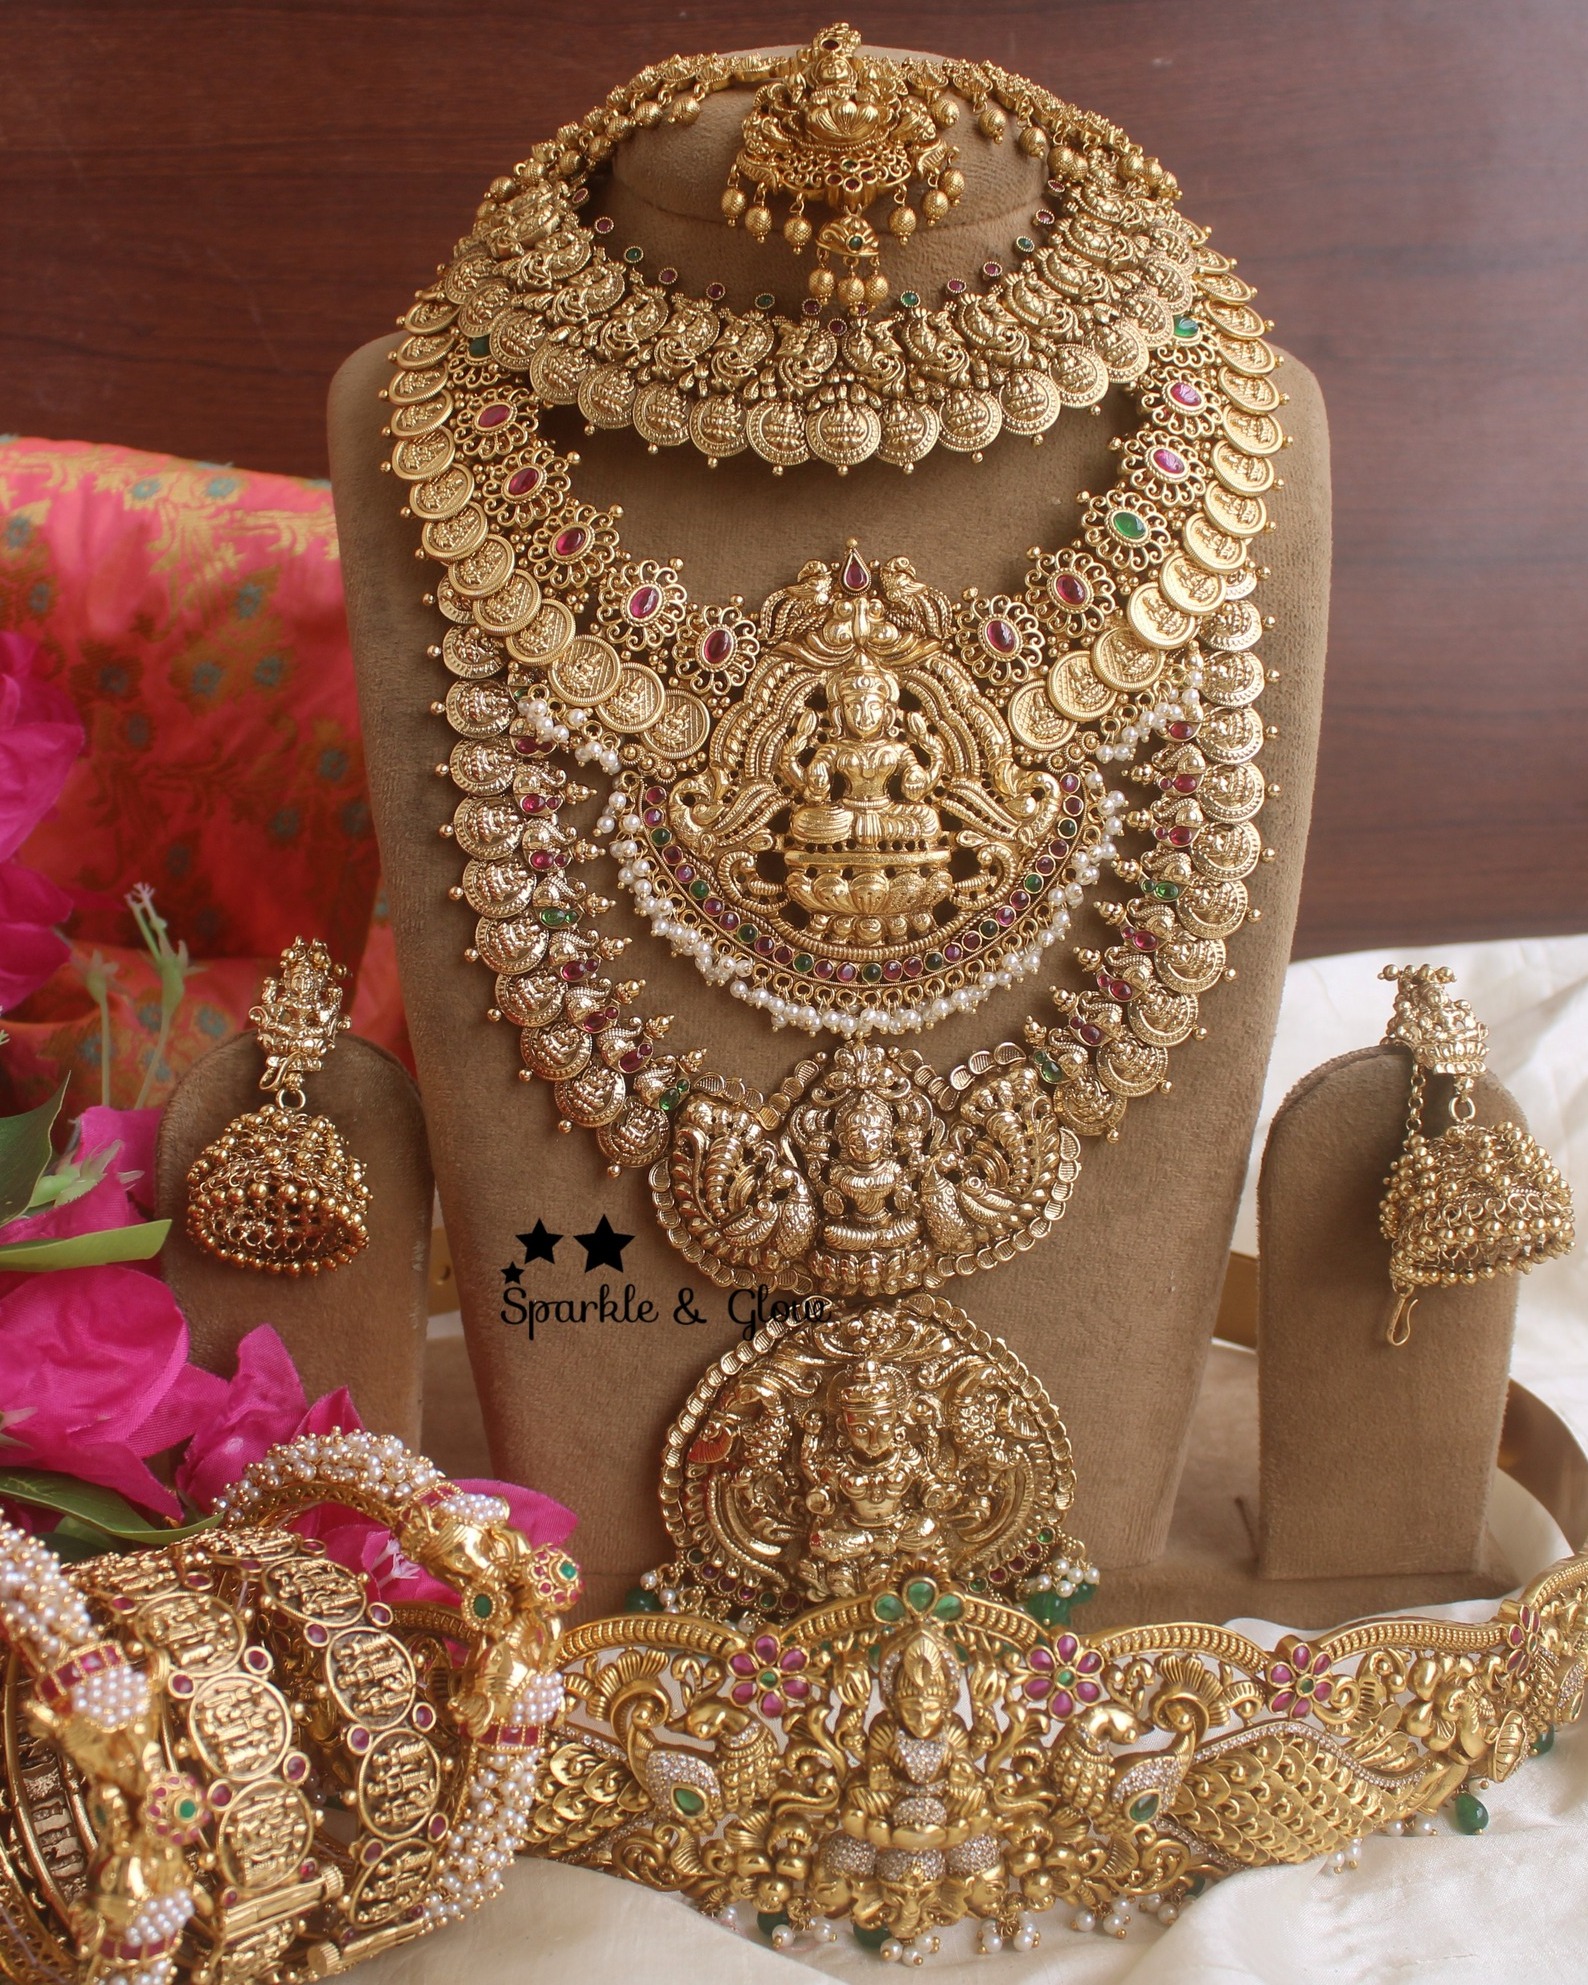 Bridal Jewellery Sets From 'Sparkles By Archana'